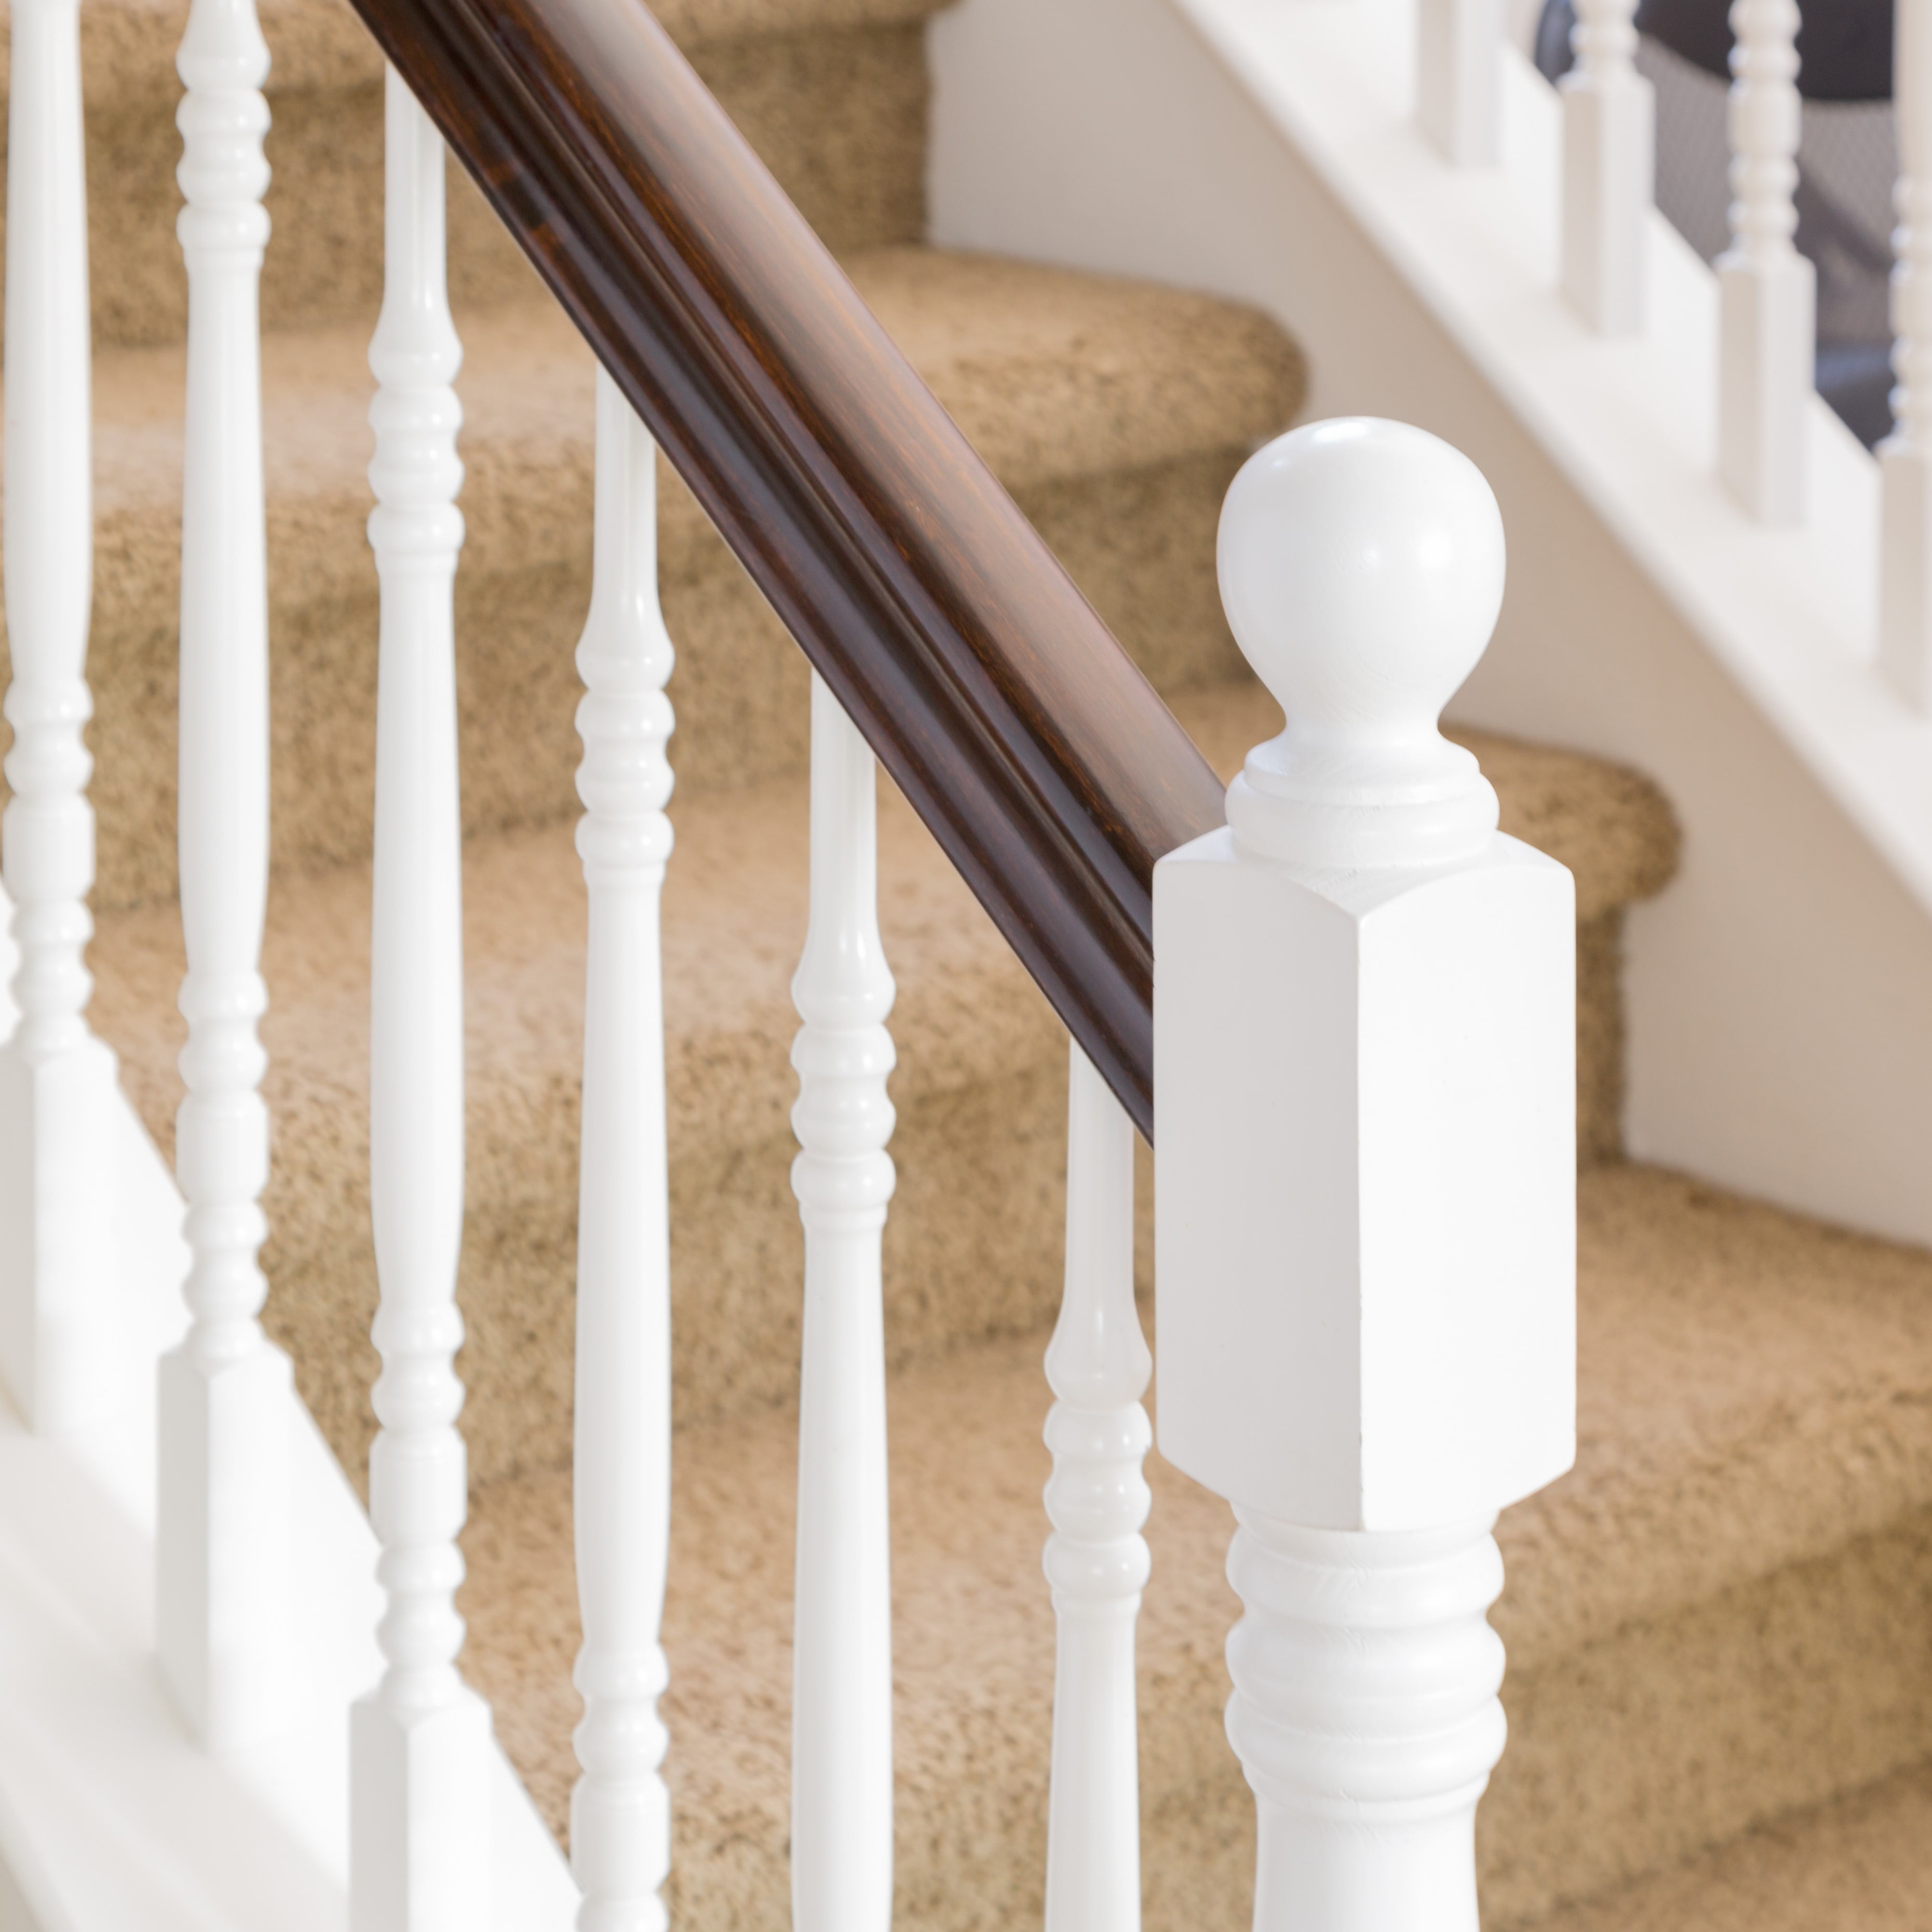 What is the best underlay for the stairs? Do you need it?